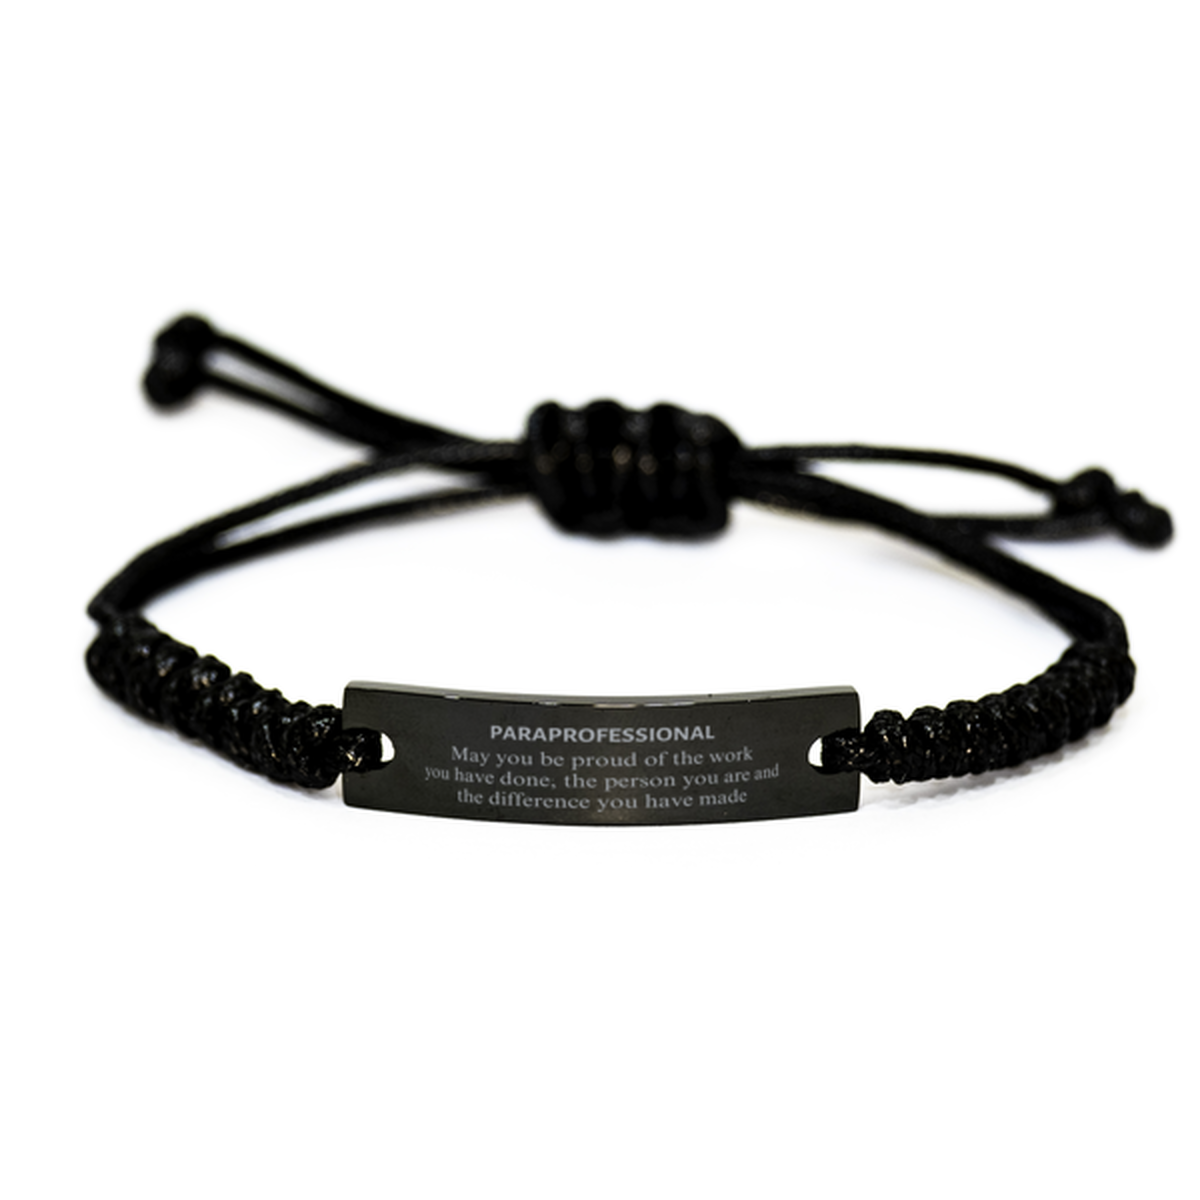 Paraprofessional May you be proud of the work you have done, Retirement Paraprofessional Black Rope Bracelet for Colleague Appreciation Gifts Amazing for Paraprofessional